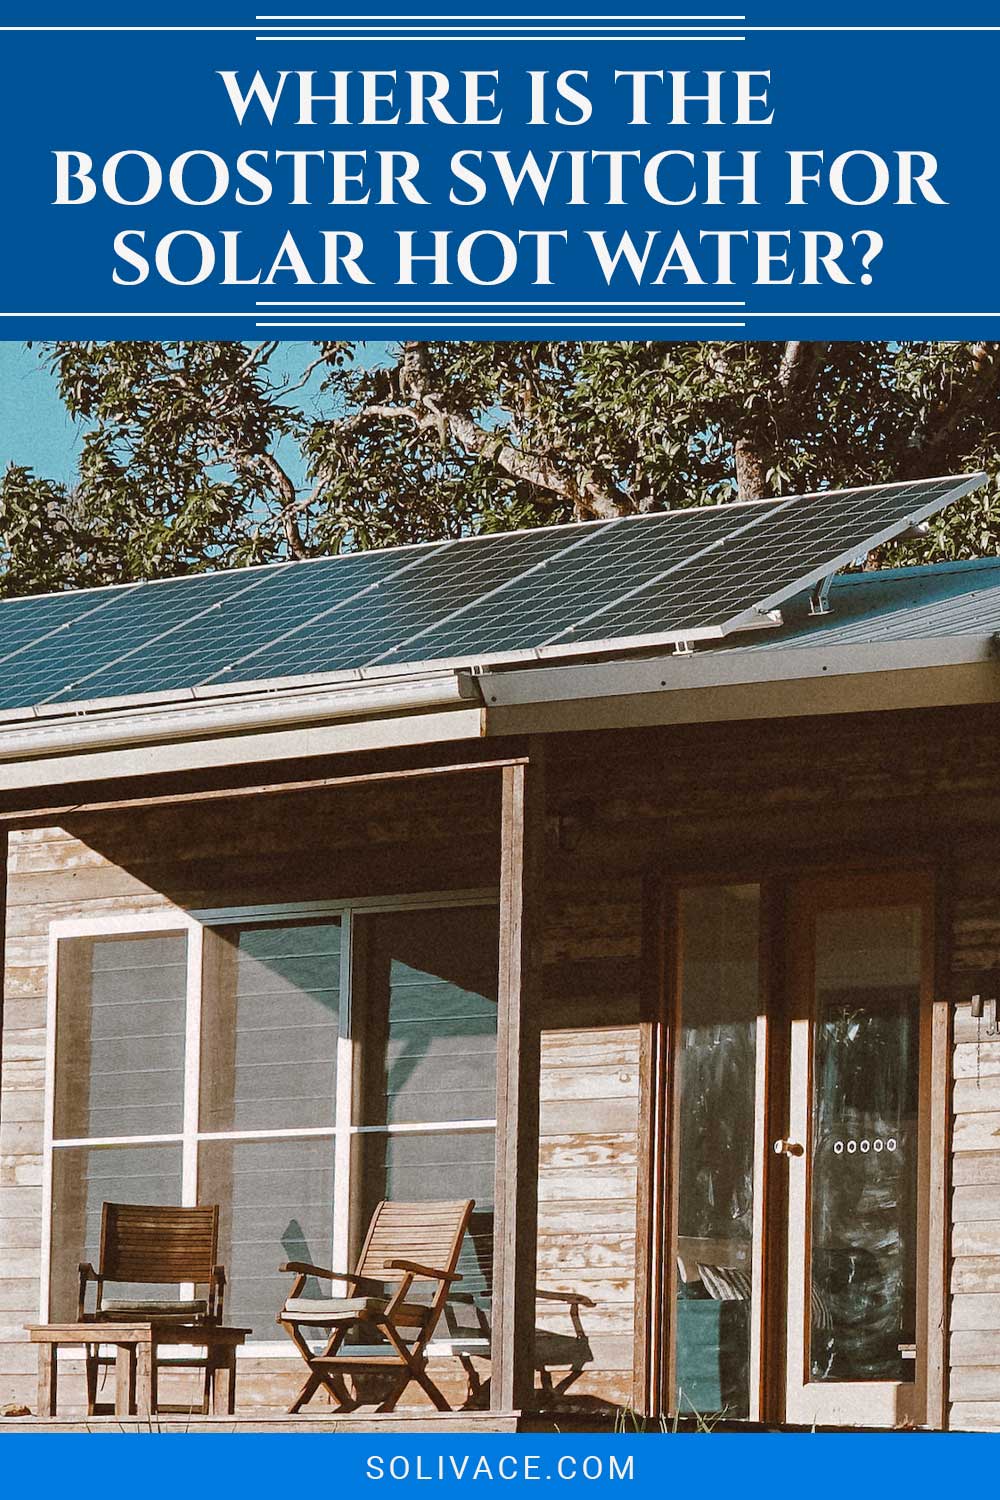 Where Is The Booster Switch For Solar Hot Water?